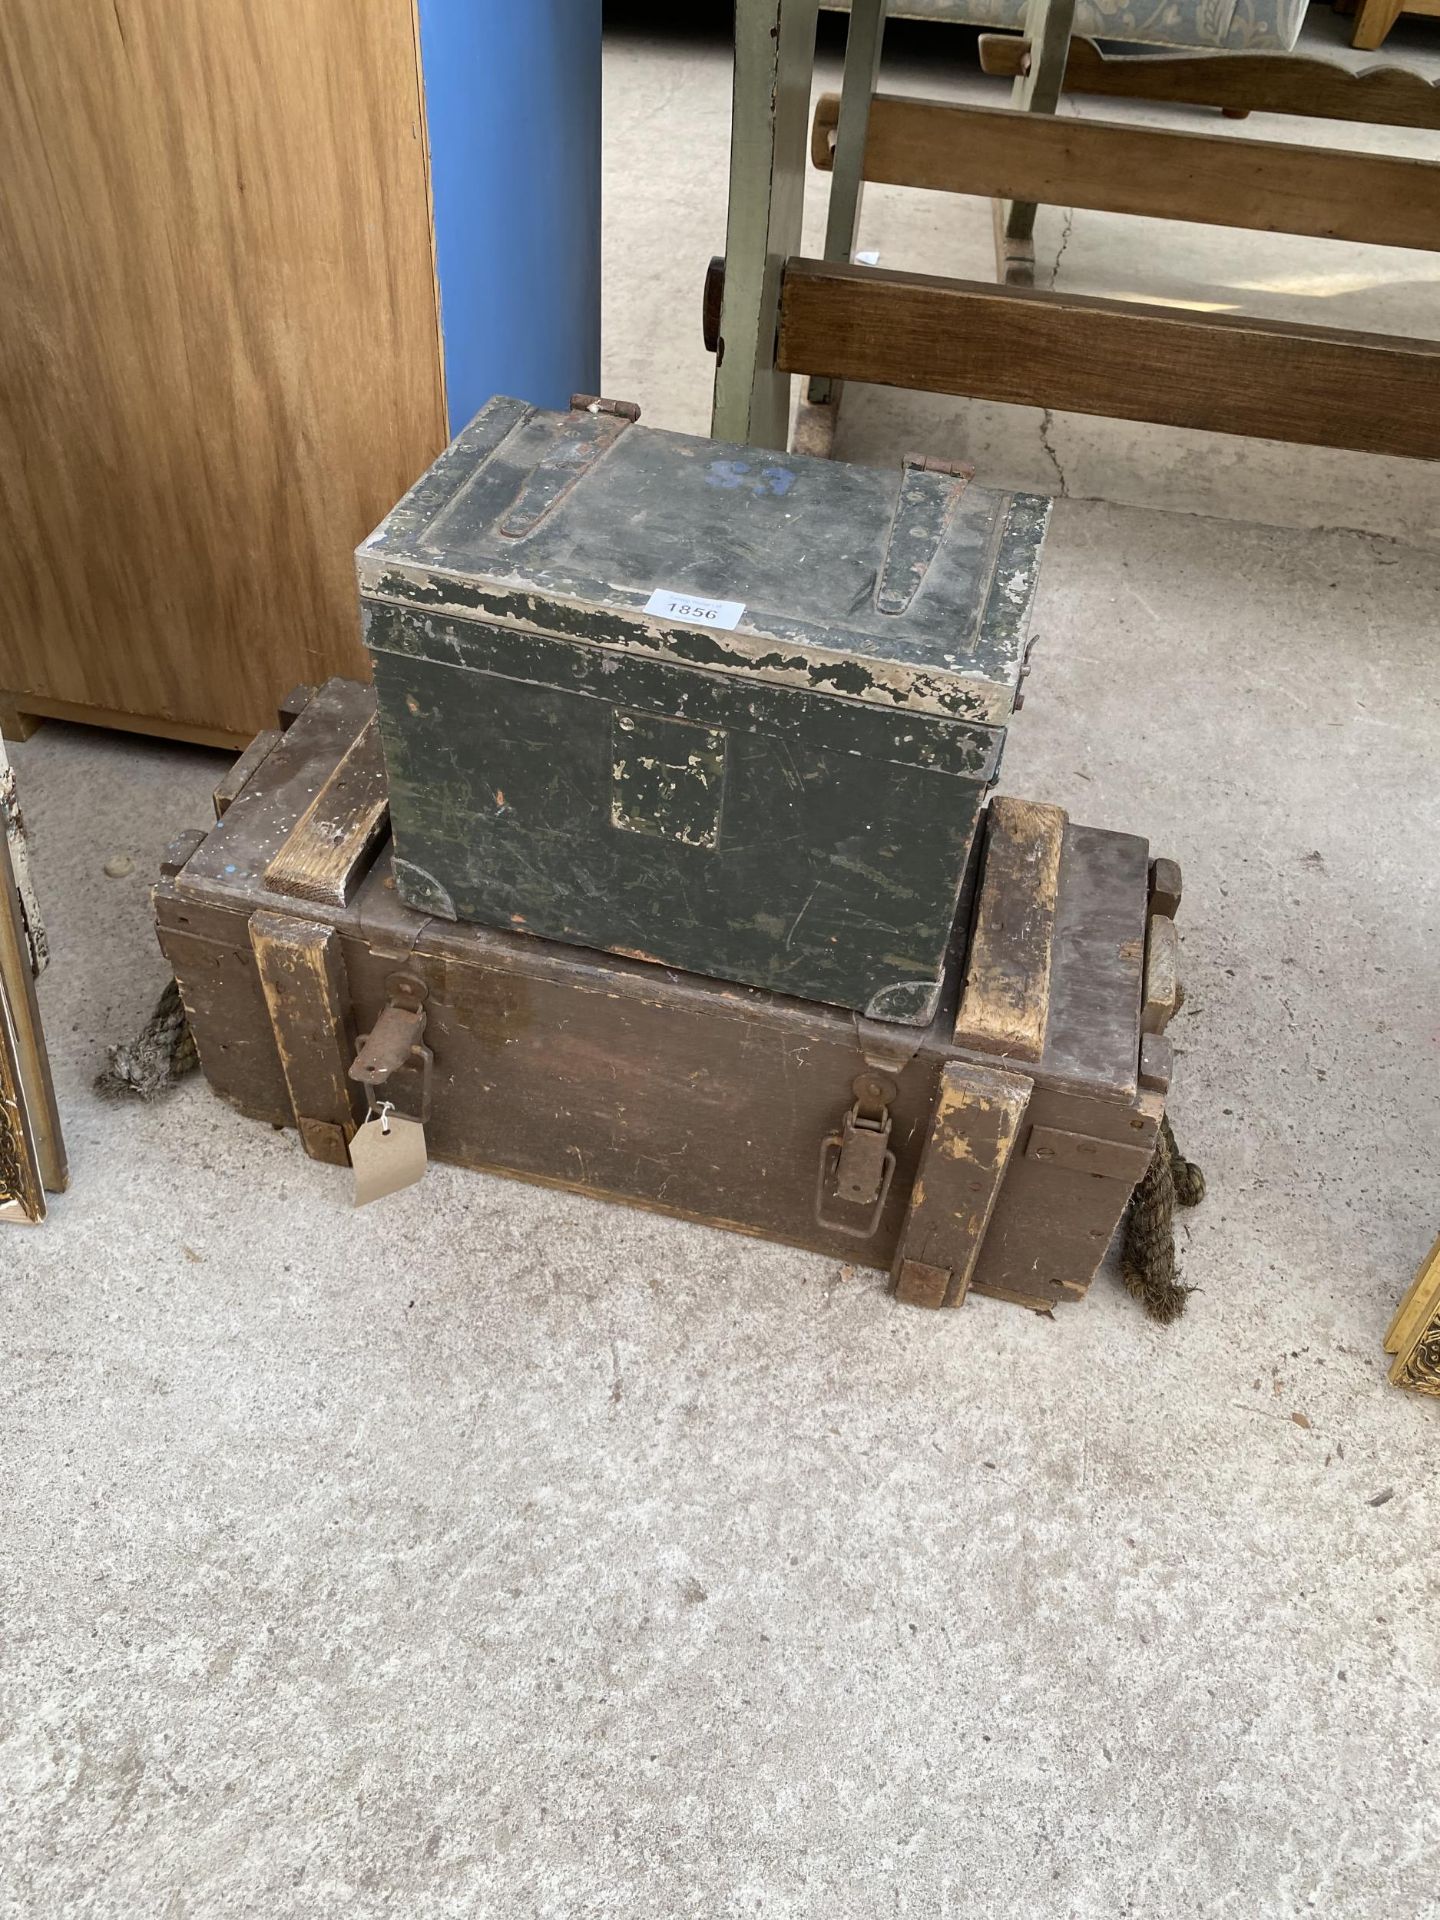 TWO WOODEN MILITARY STORAGE CHESTS